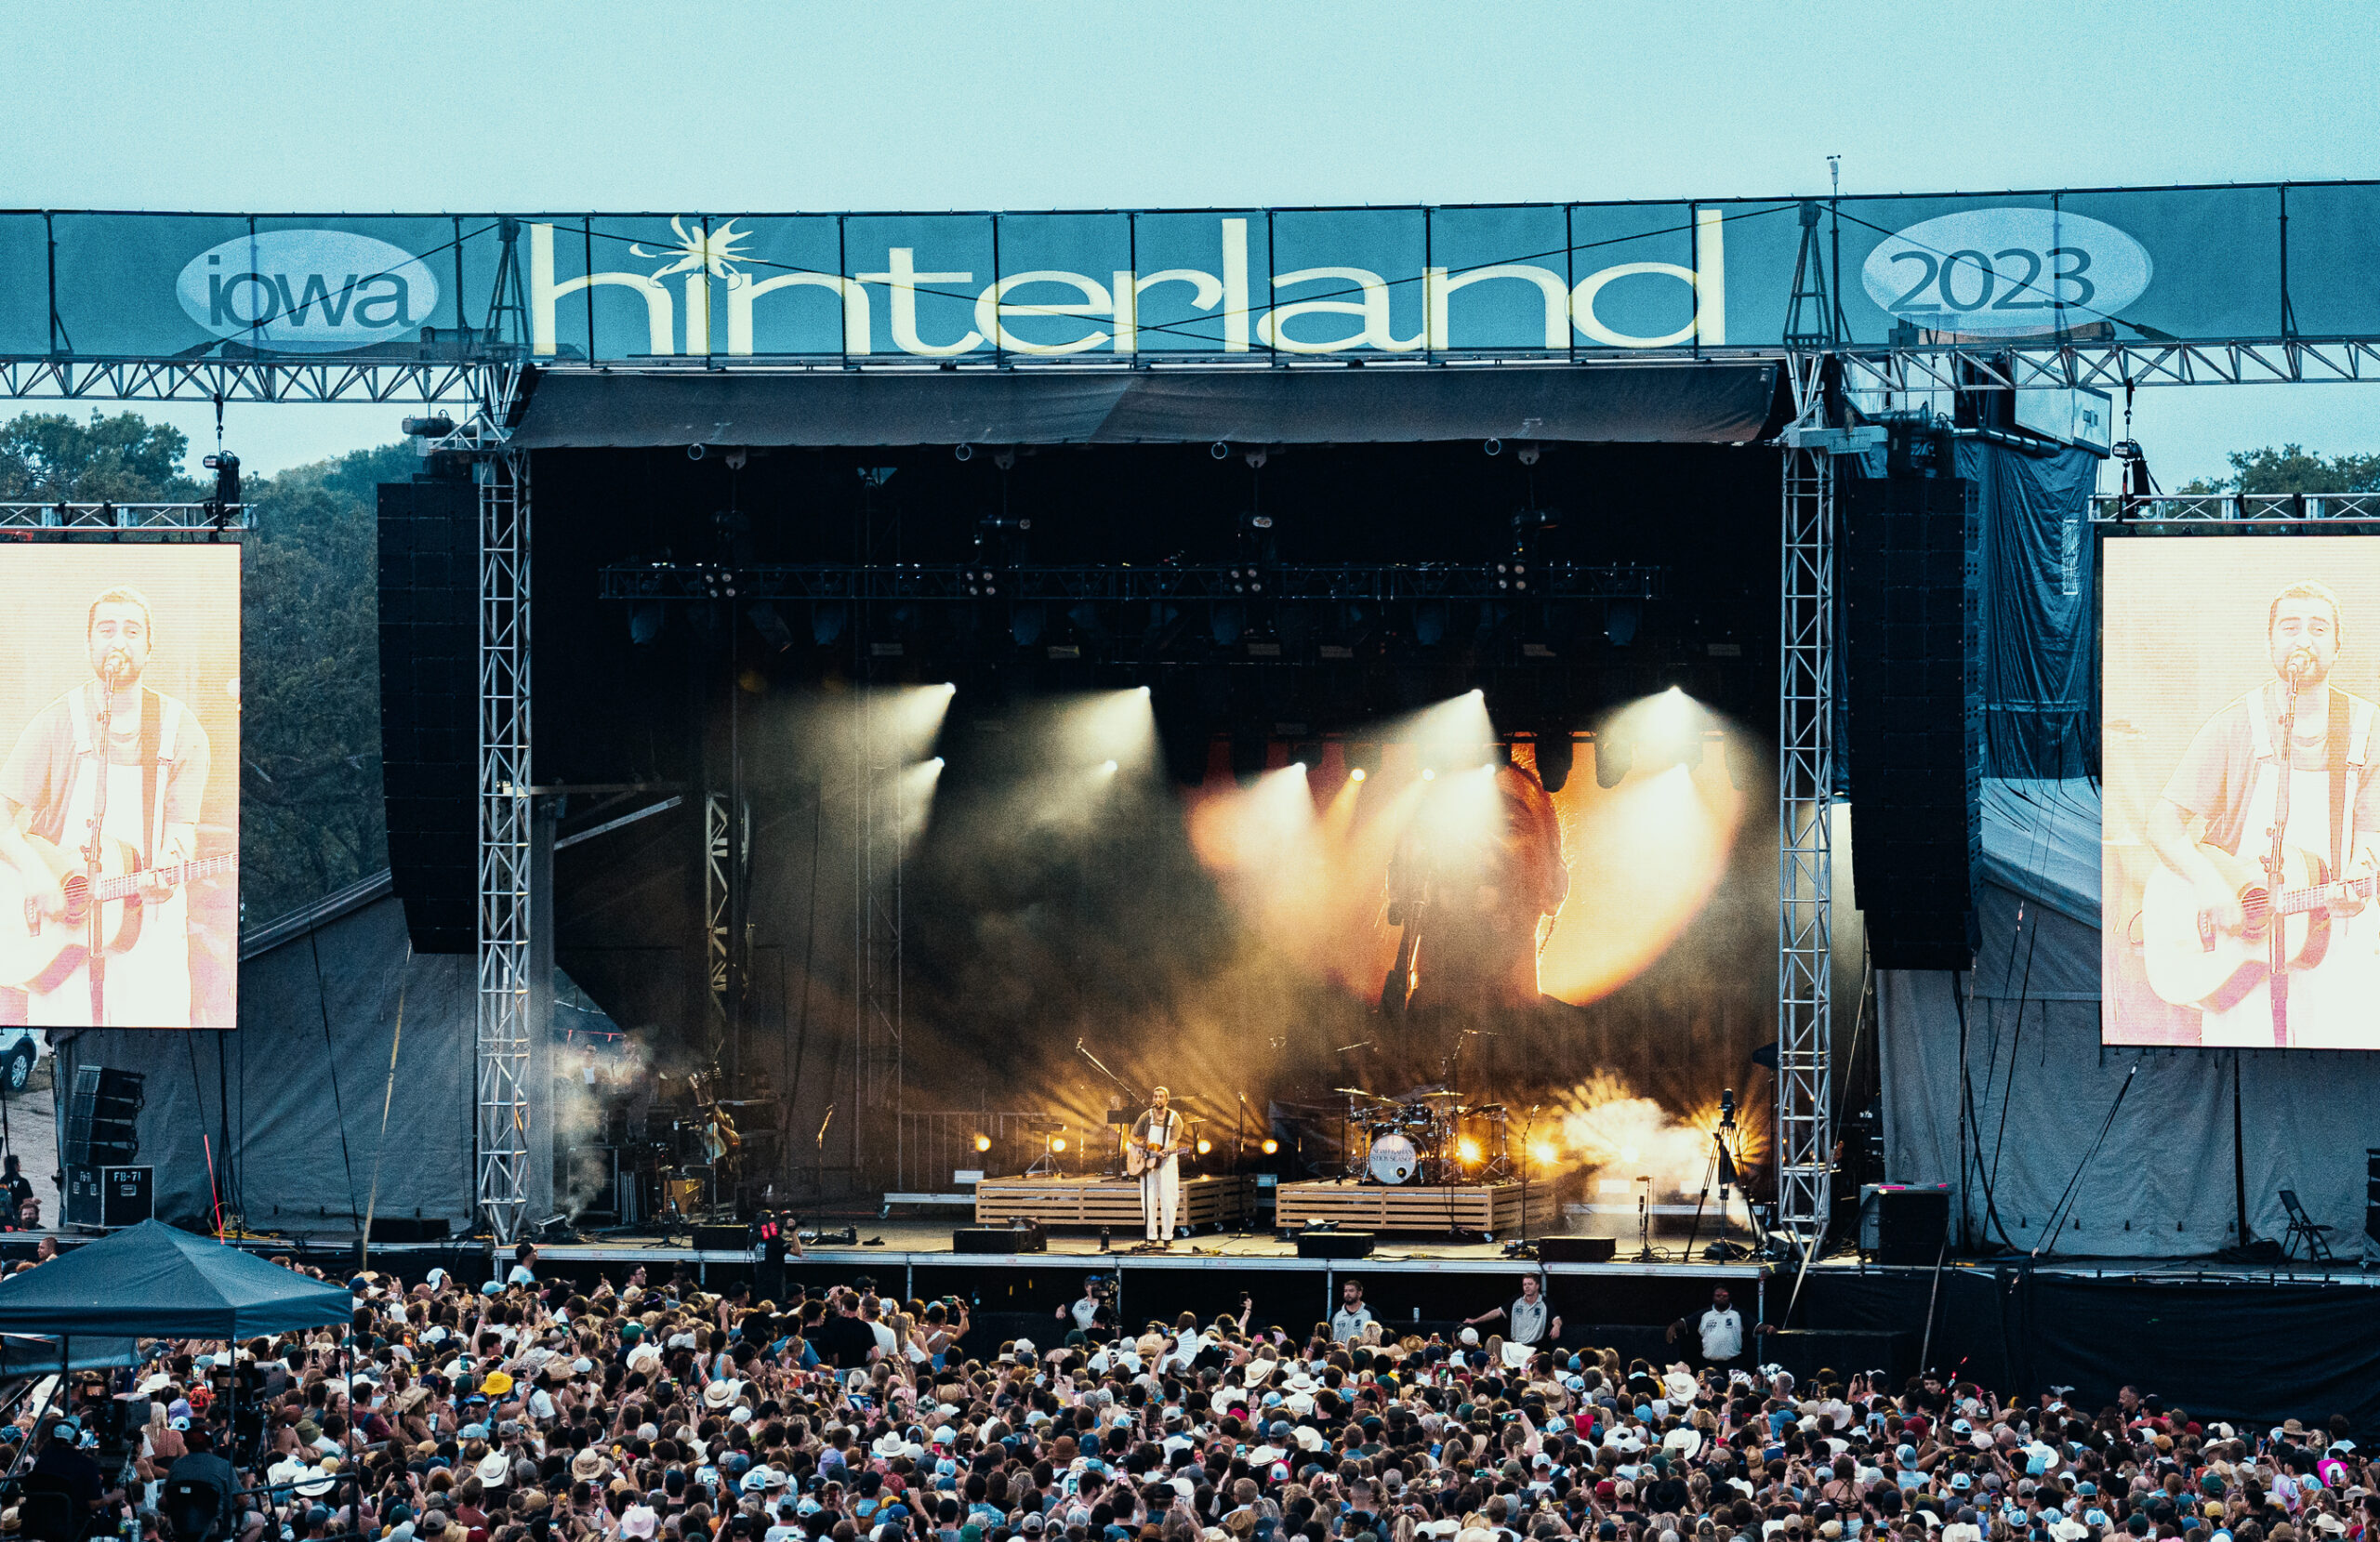 Noah Kahan performs on the Hinterland stage in front of a large crowd in 2023. A Hinterland sign is above the stage in blue with with letters.